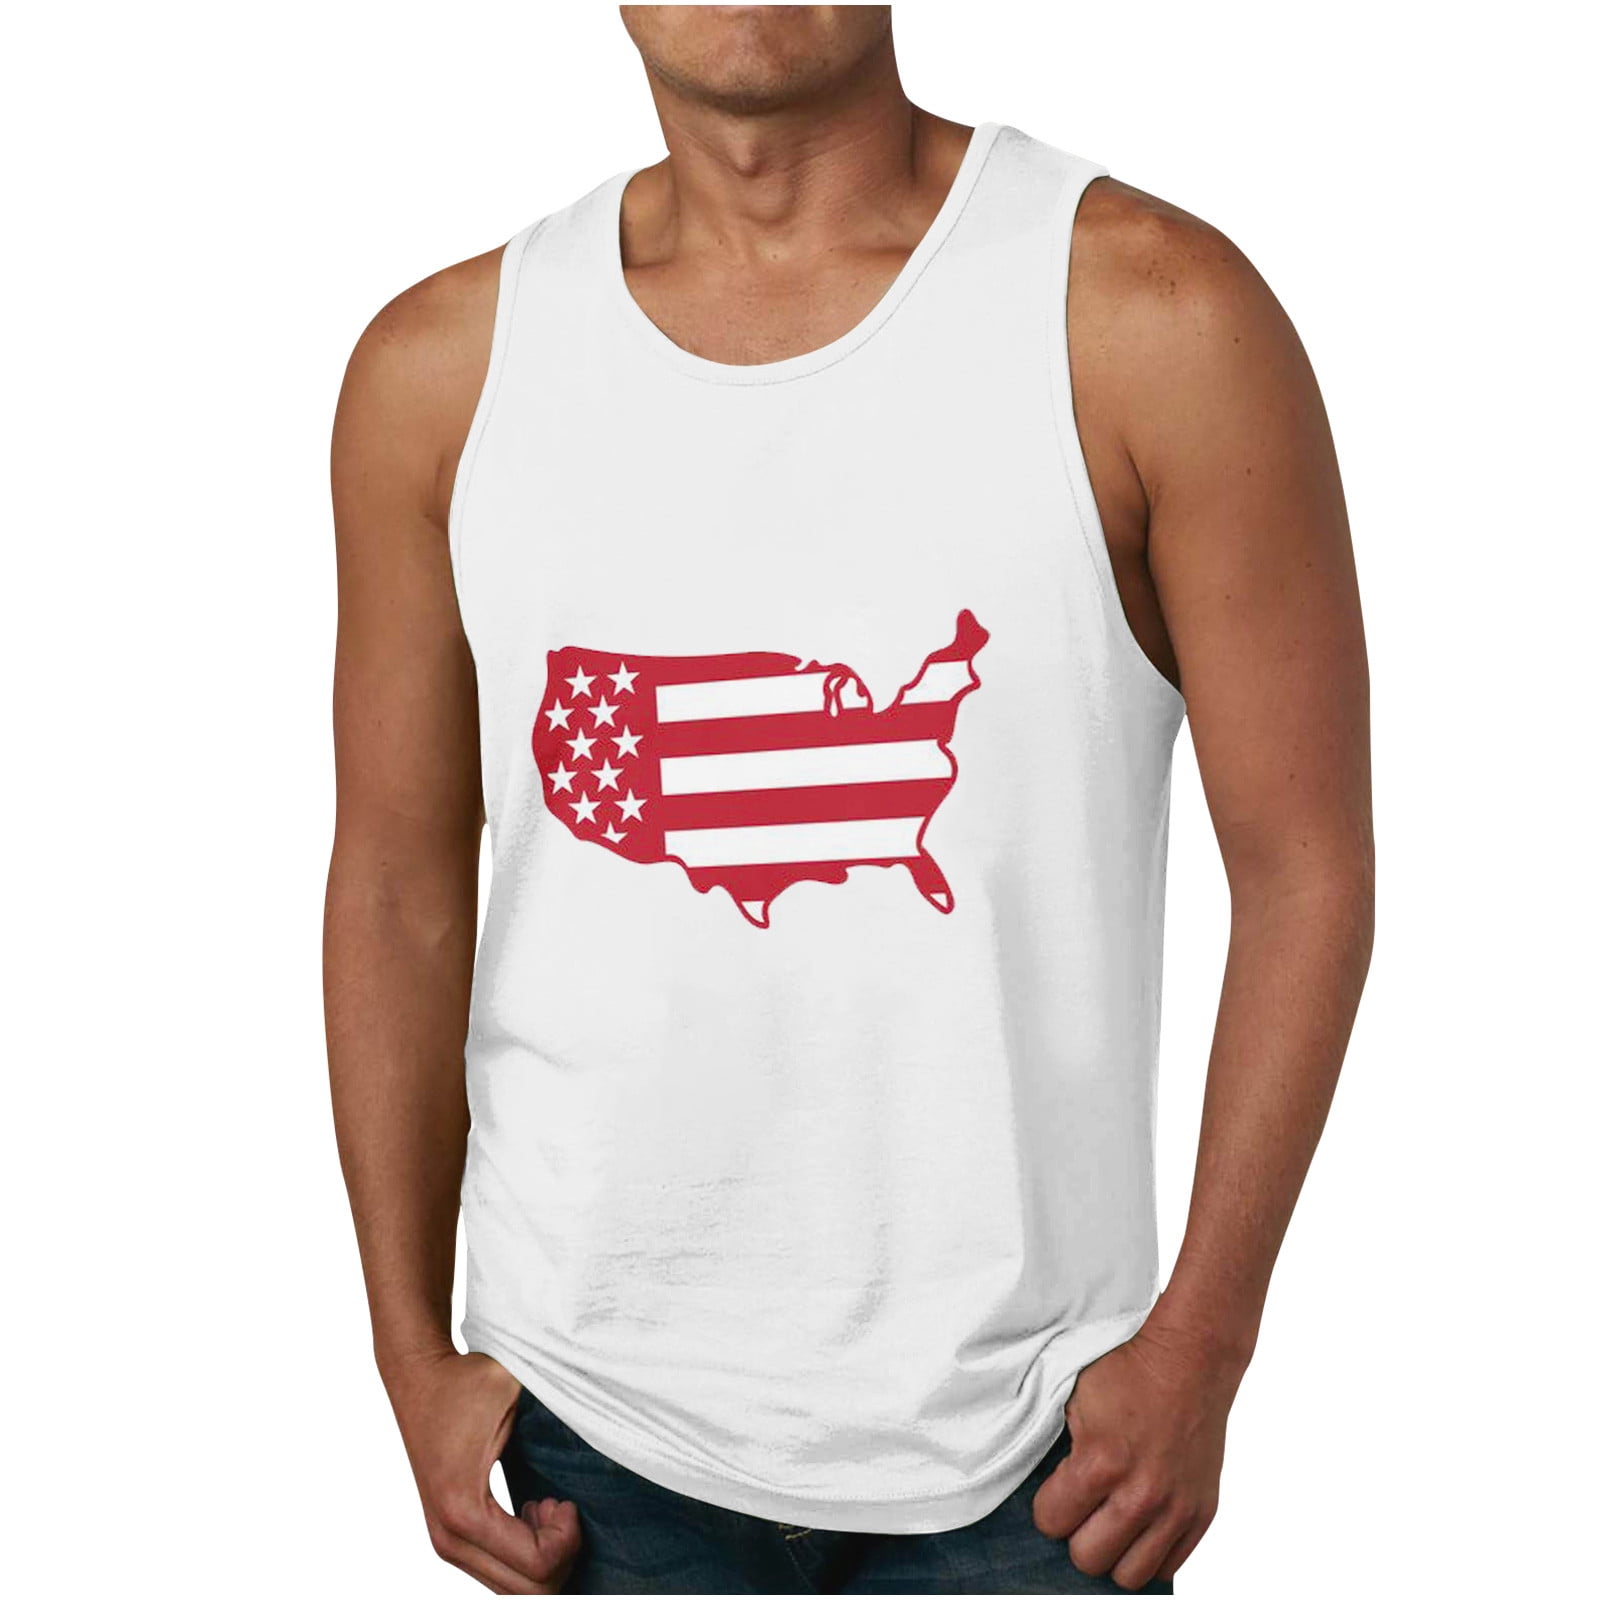 4th of July Tank Tops for Men Plus Size Sleeveless Tee Quick Dry USA ...